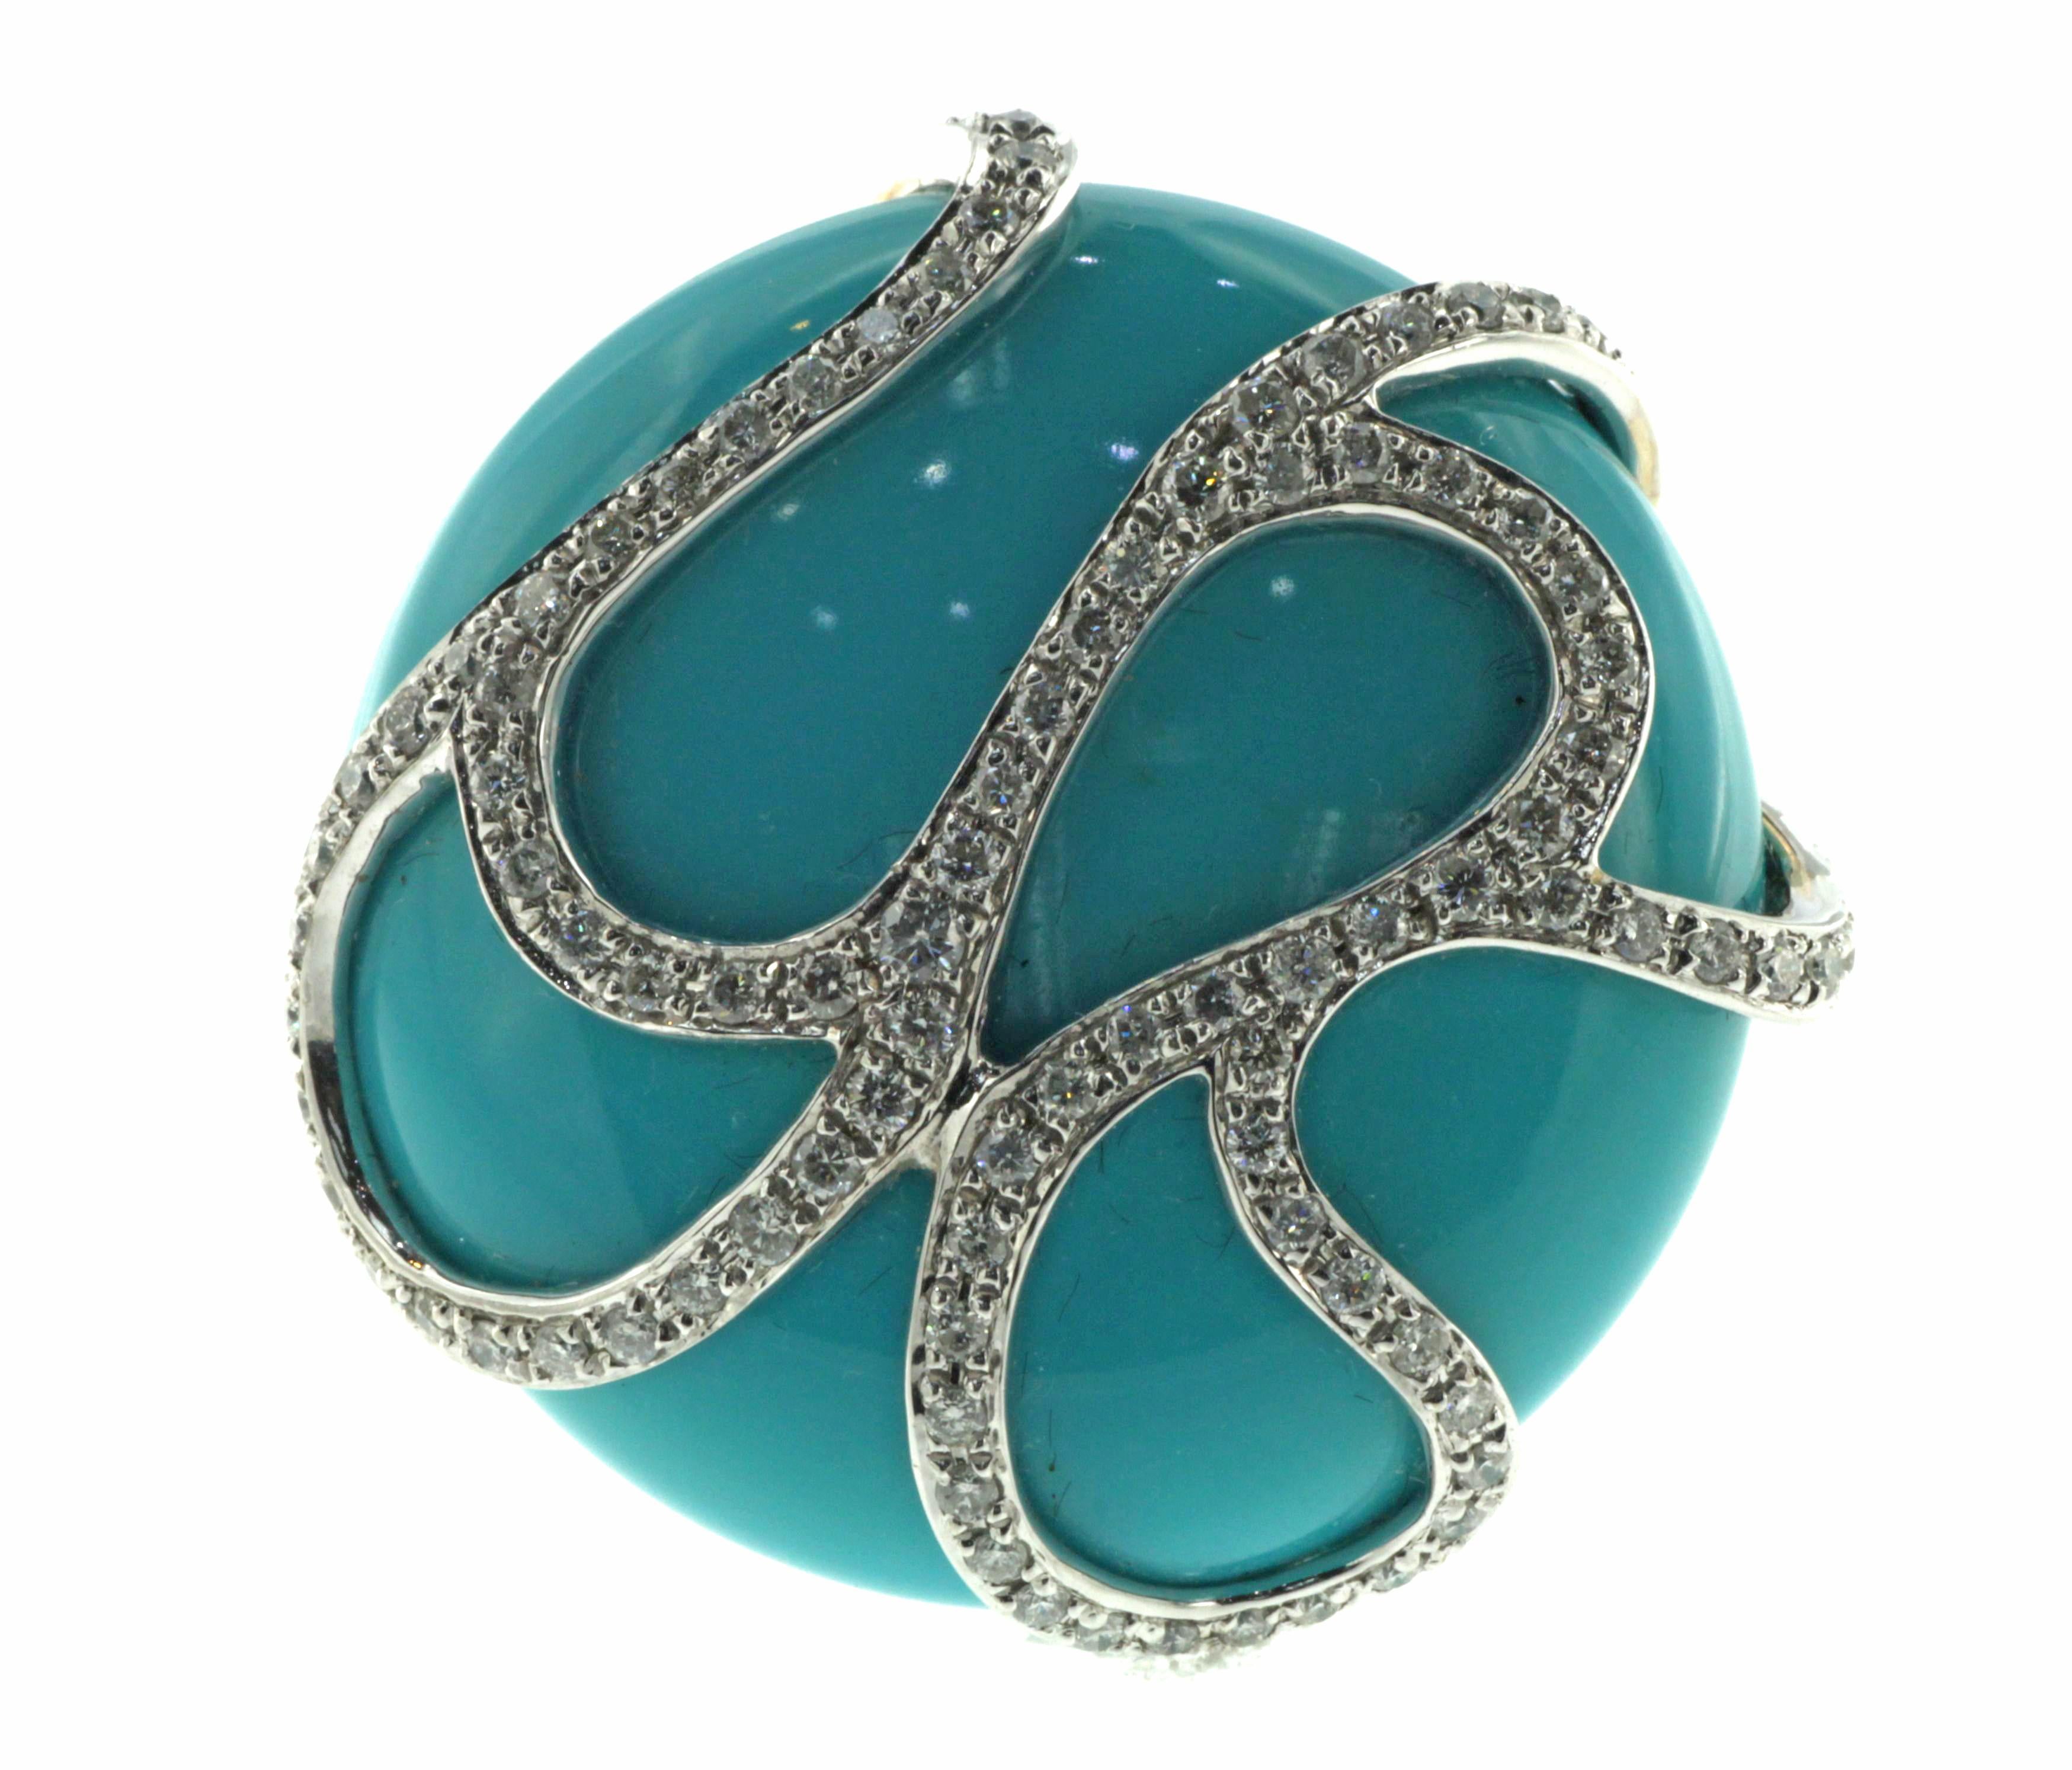 Introducing our magnificent 55.85Ct Huge Sleeping Beauty Turquoise Ring with Diamonds in 14K White Gold. This meticulously crafted ring showcases a single, awe-inspiring piece of round Sleeping Beauty mine turquoise, weighing an impressive 55.85